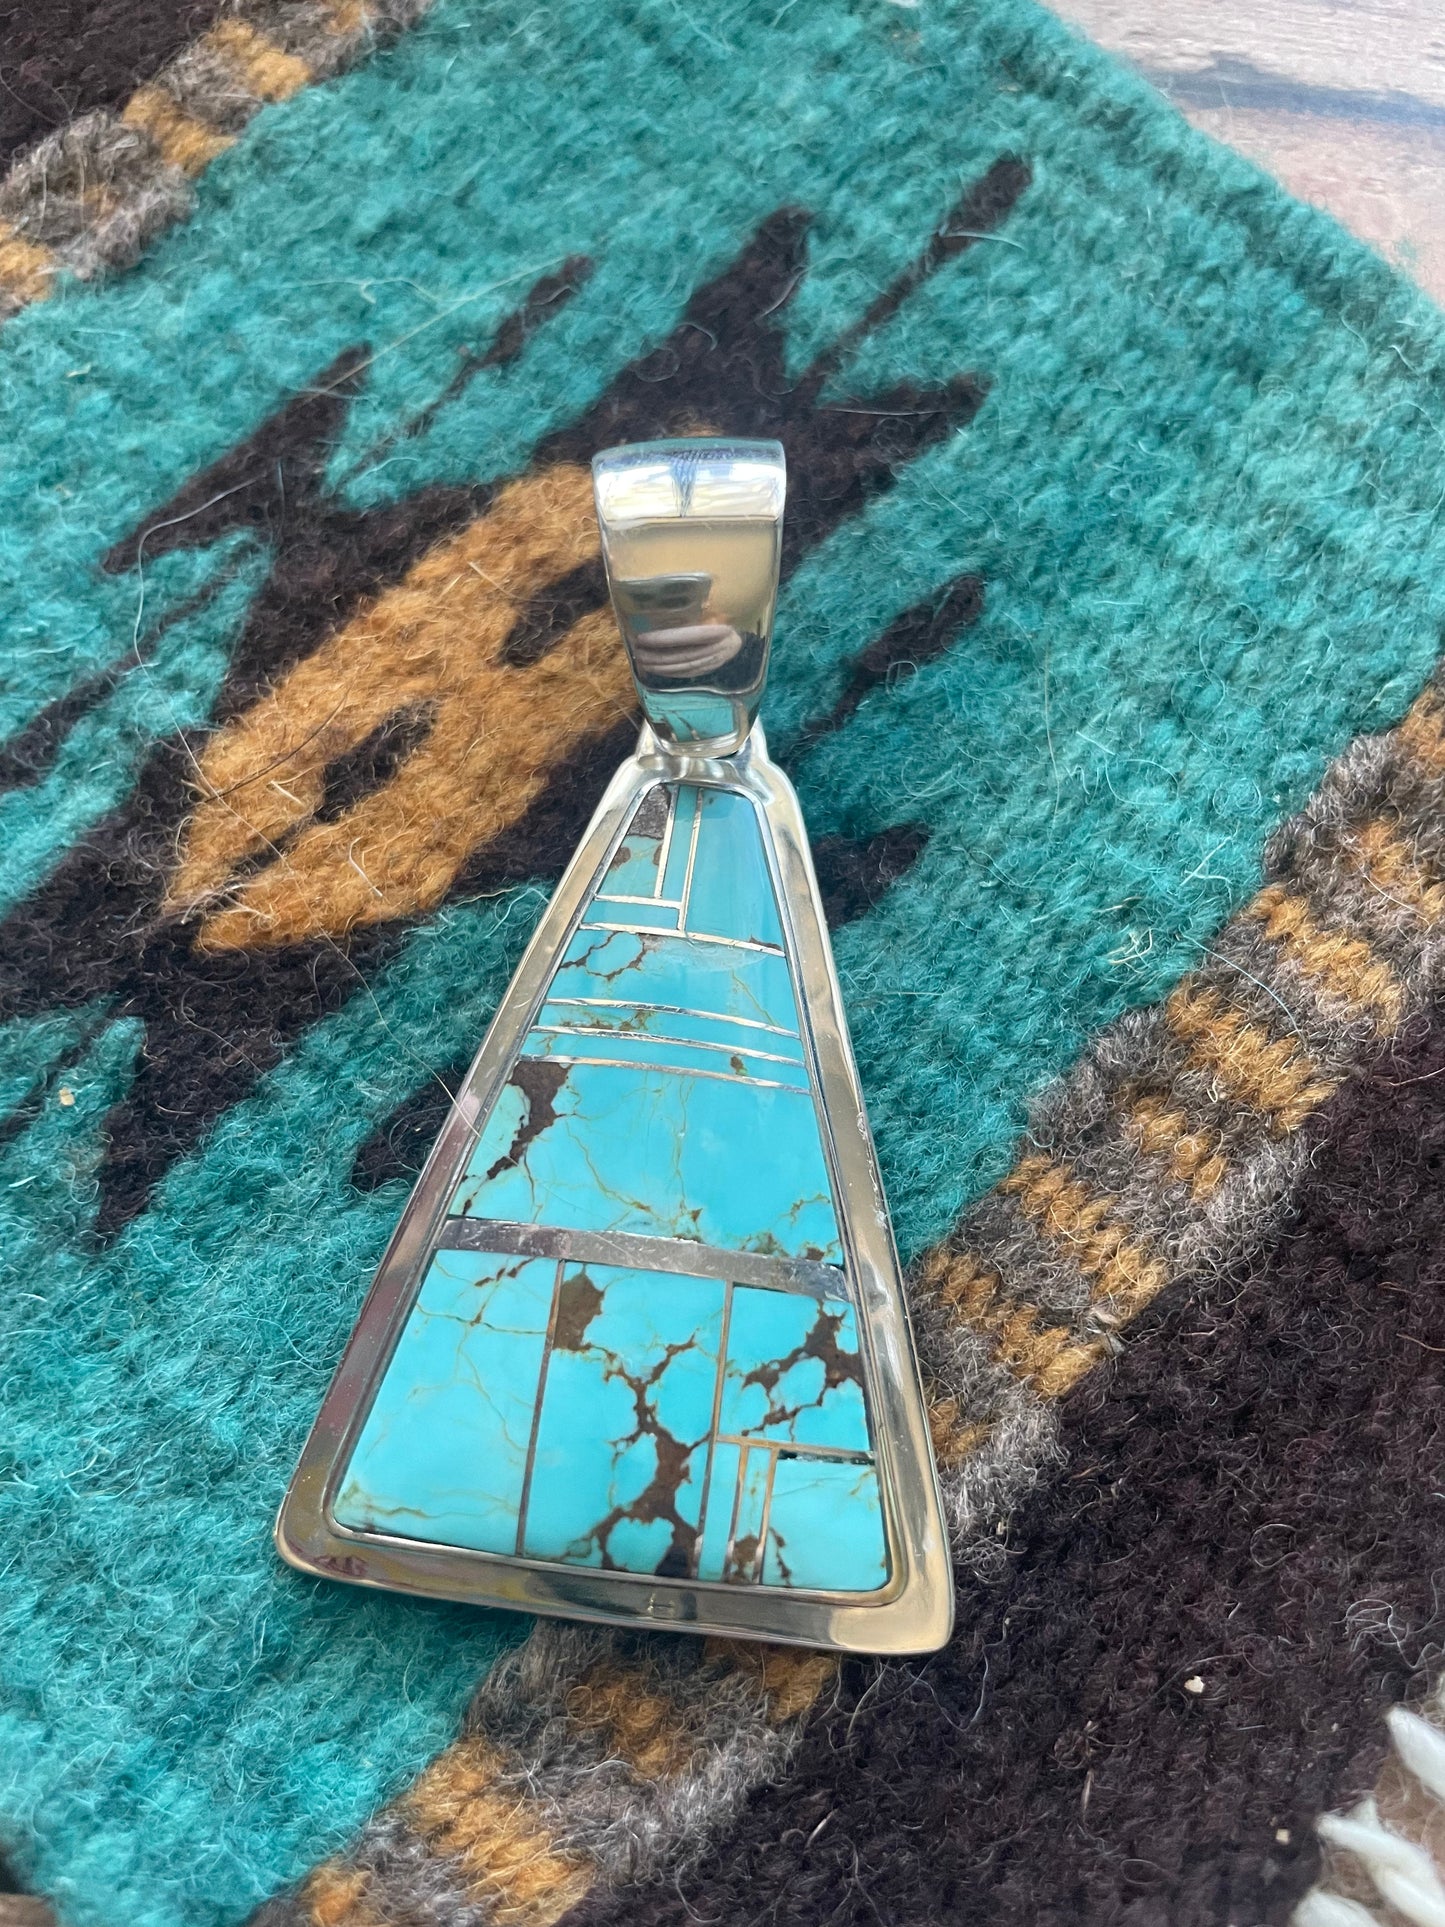 Navajo Number 8 Turquoise Inlay & Sterling Silver Triangle Pendant